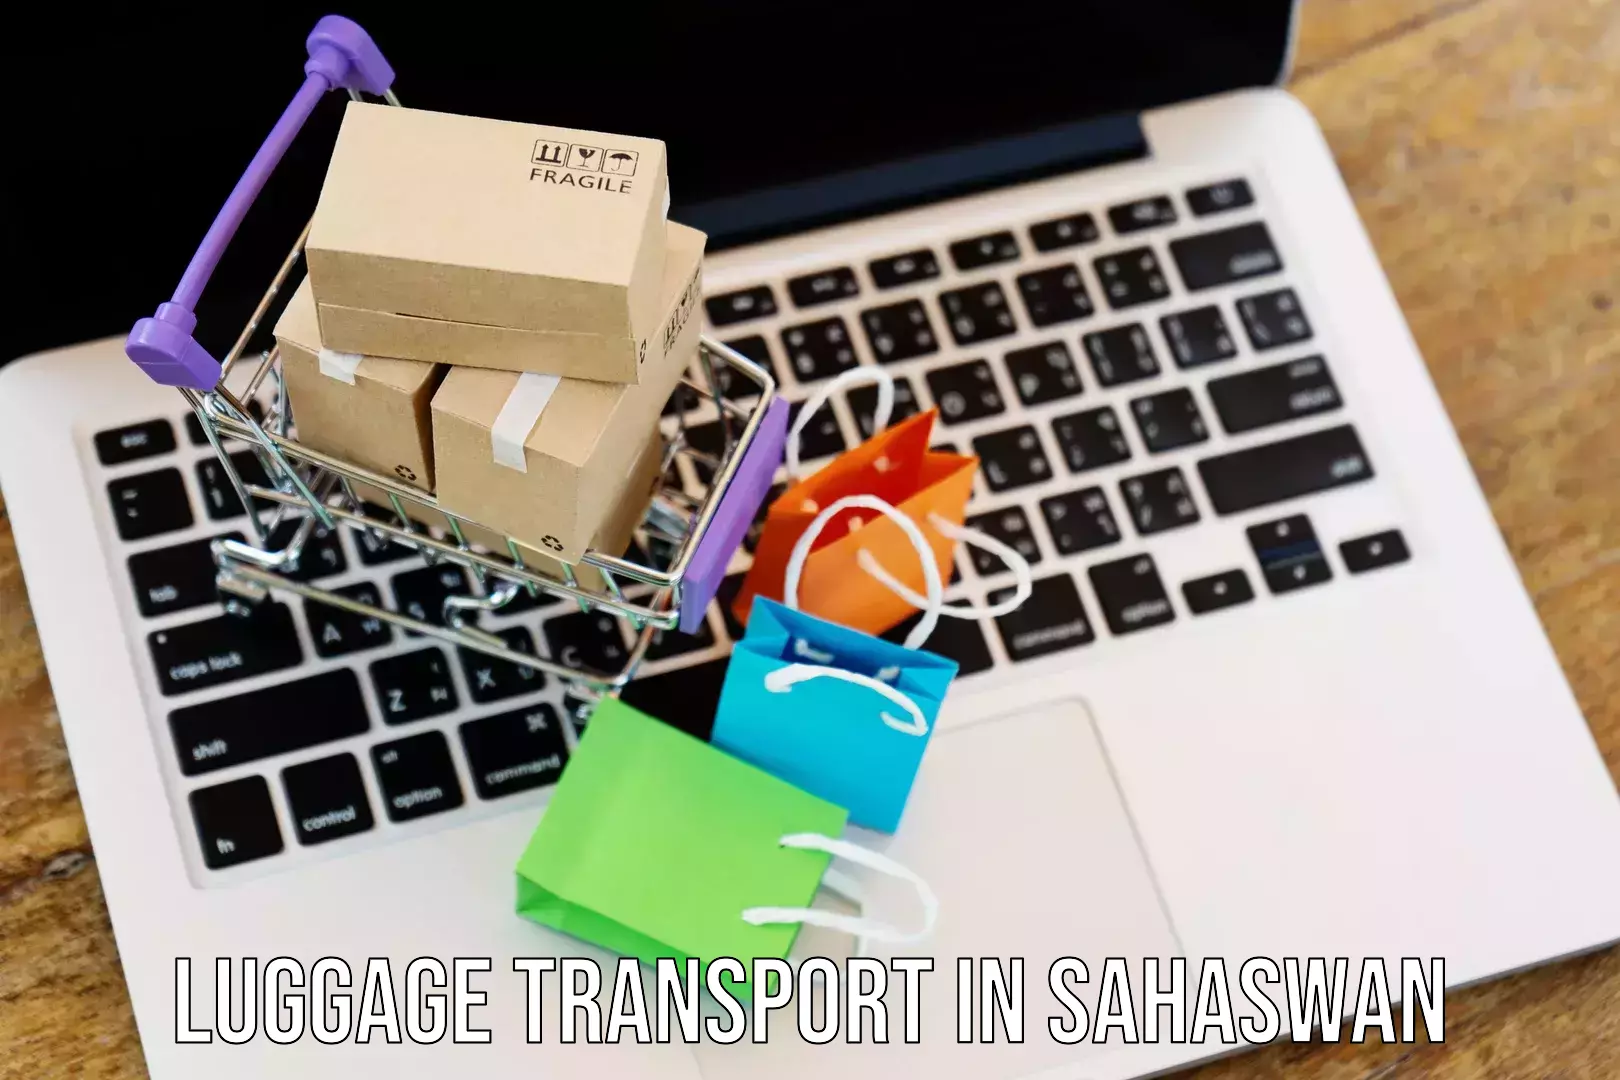 Luggage storage and delivery in Sahaswan